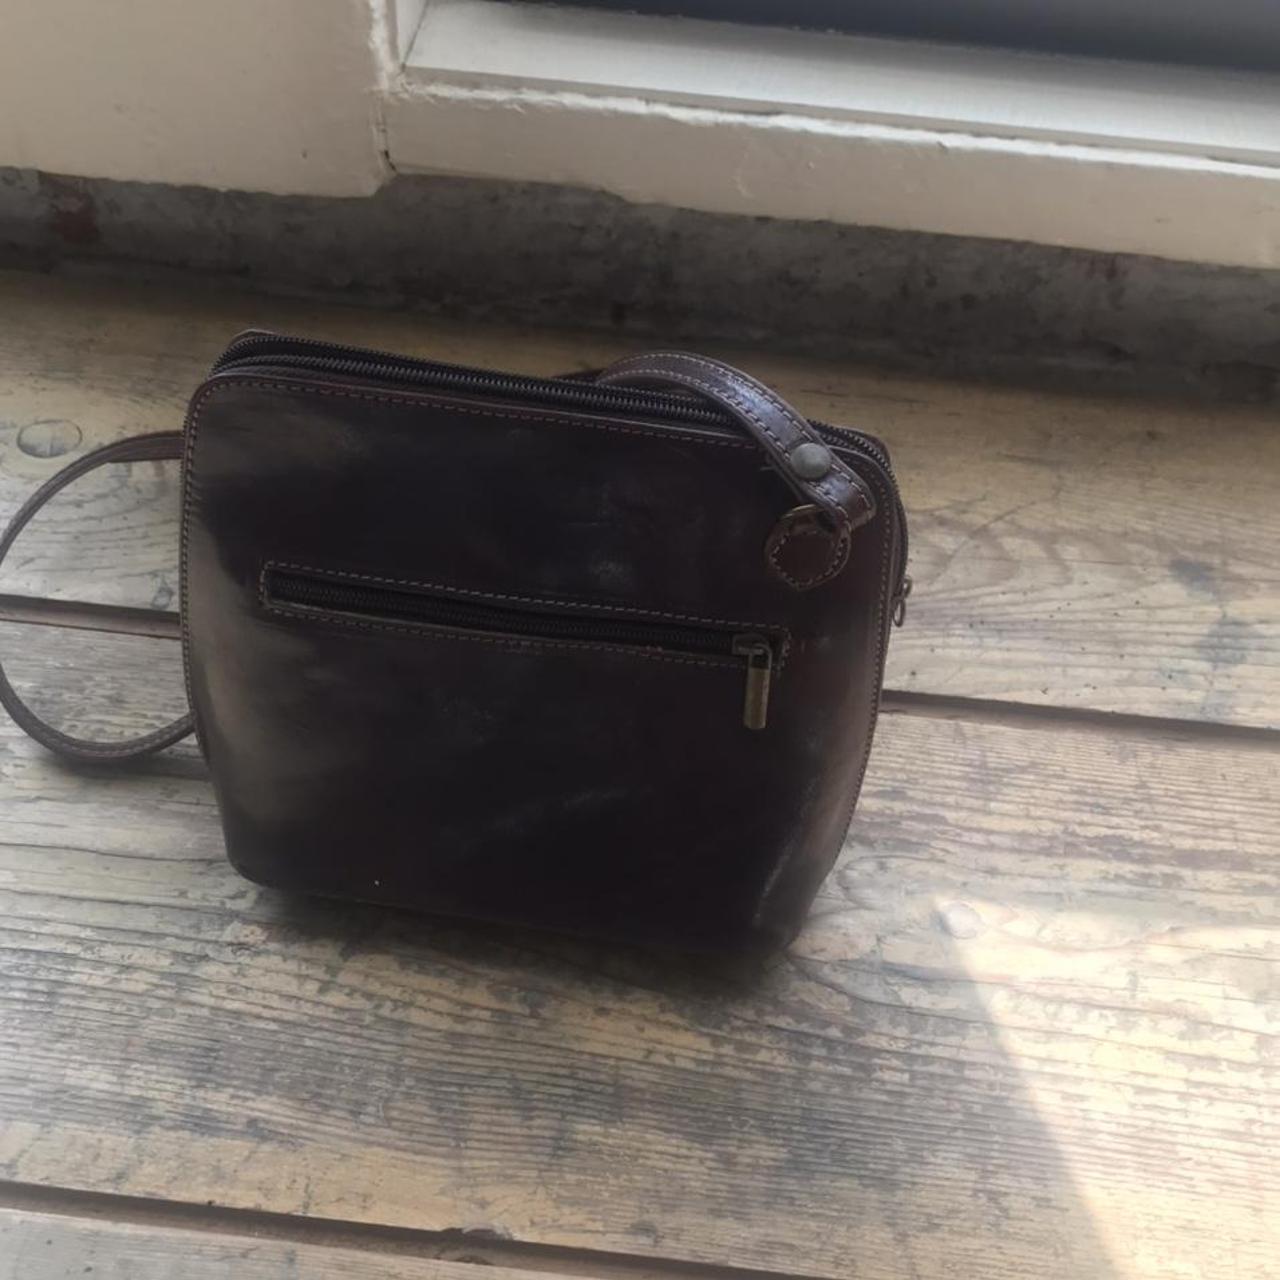 Product Image 4 - I got this bag in